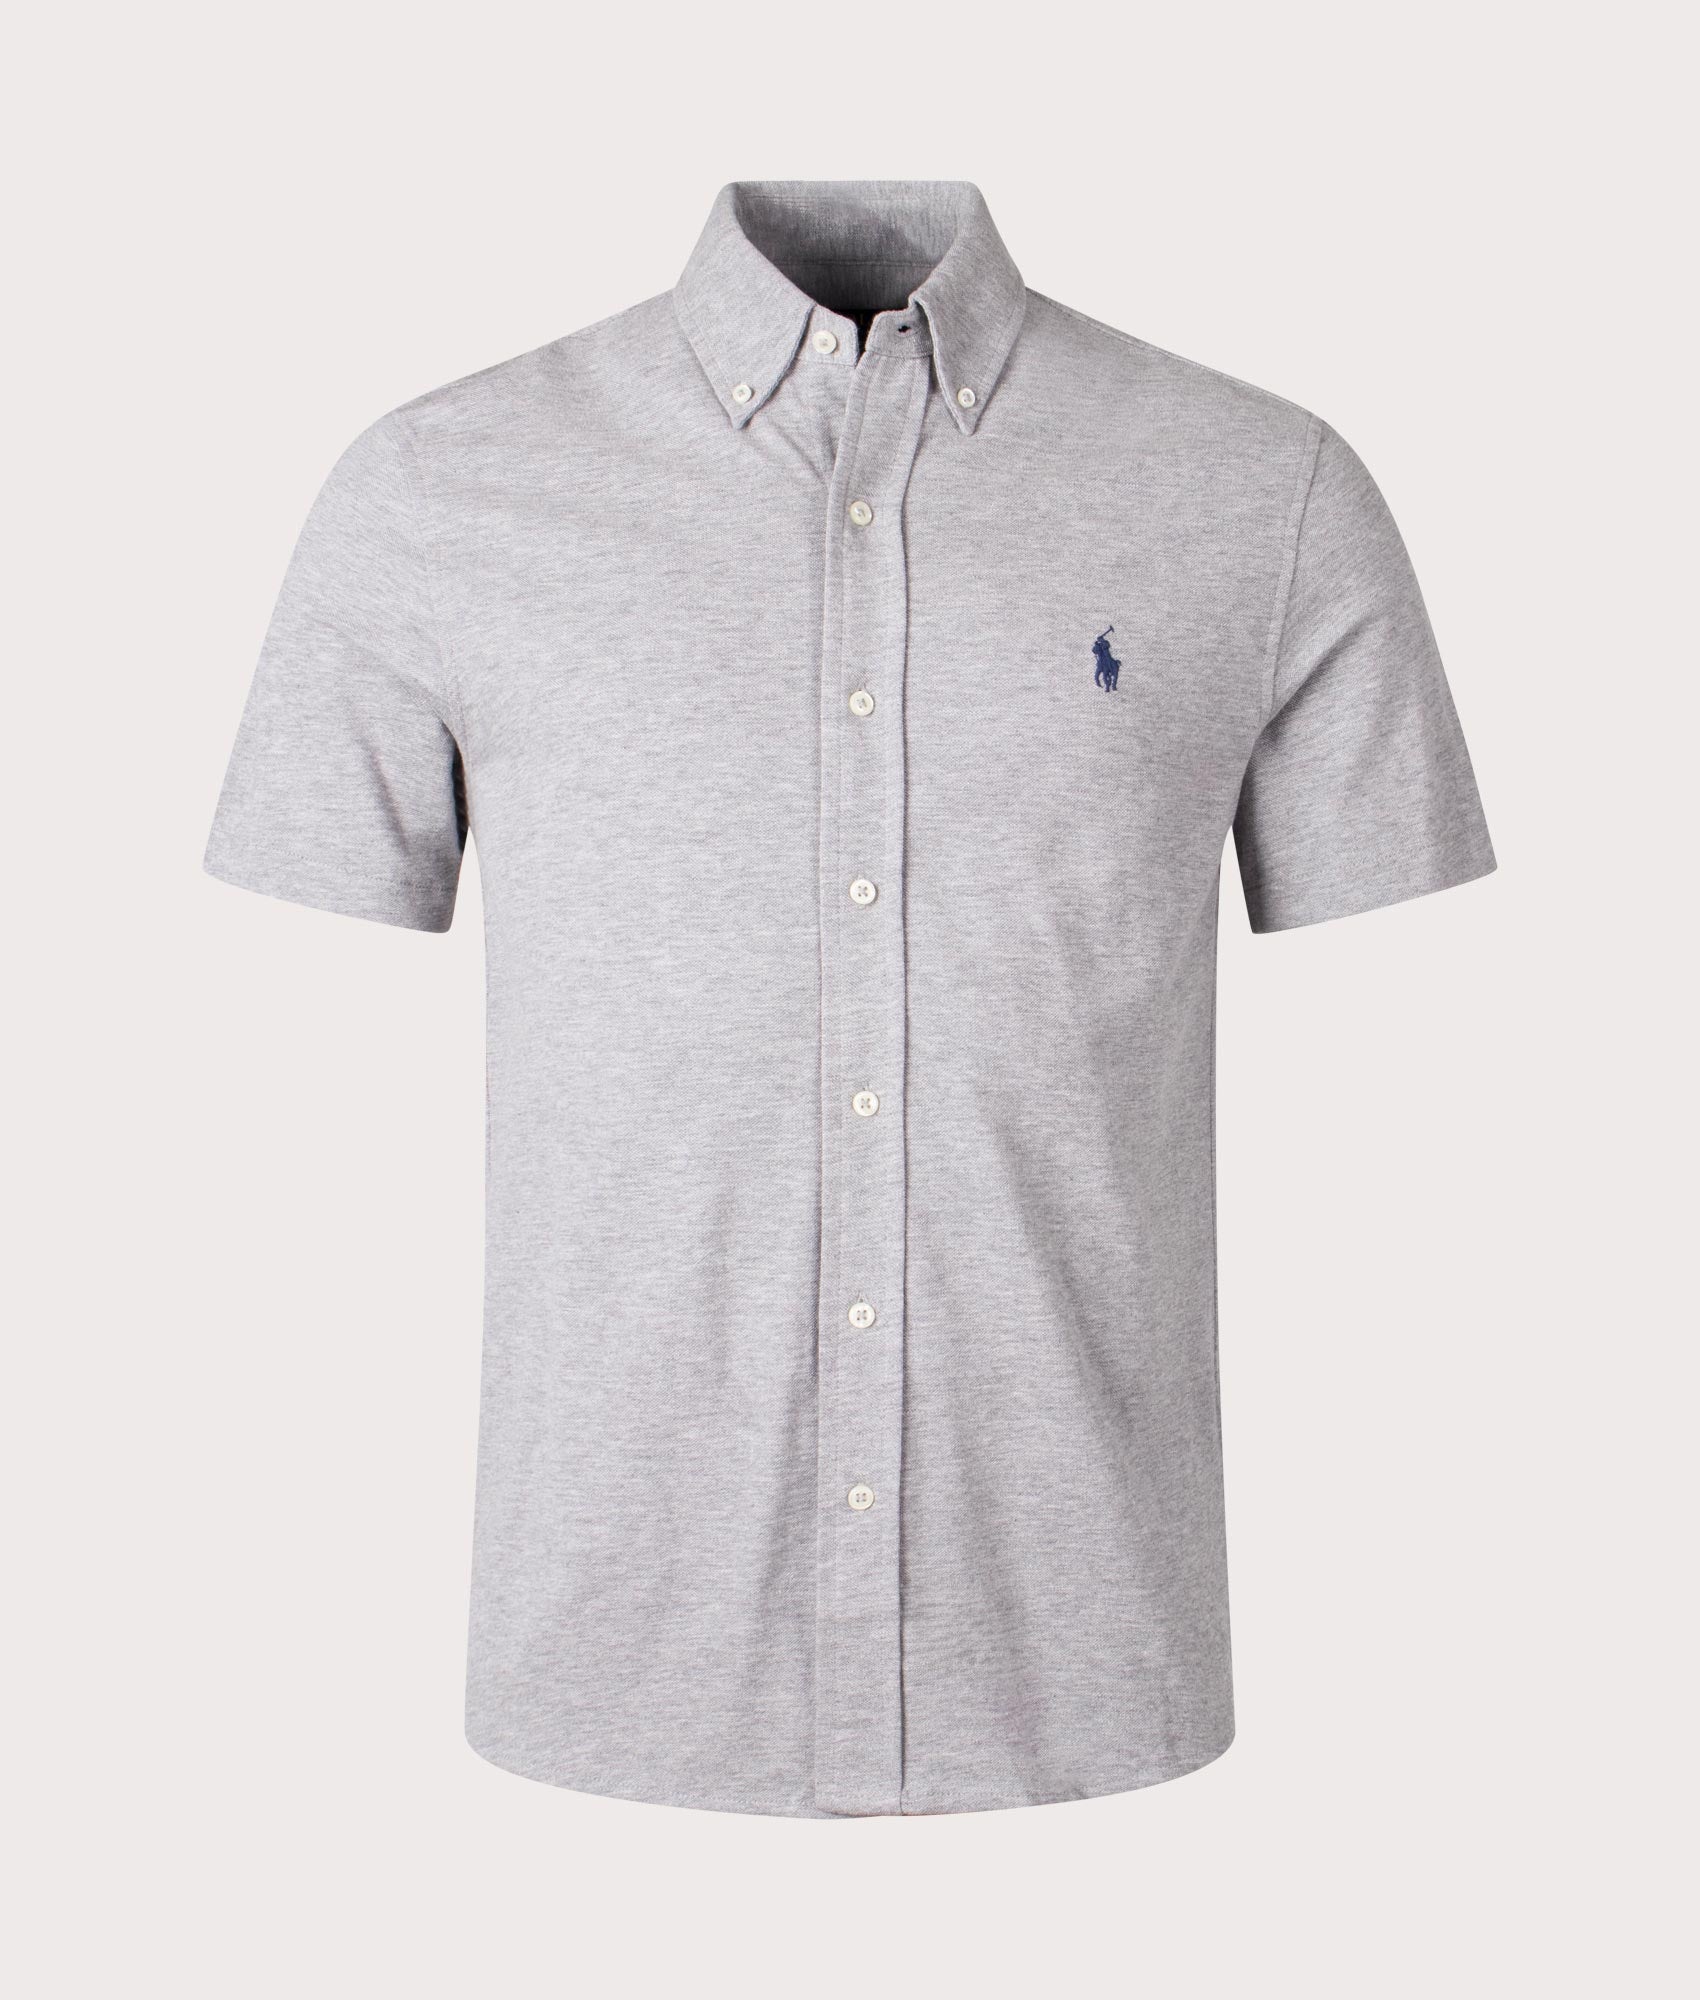 Polo Ralph Lauren Mens Featherweight Mesh Short Sleeve Shirt - Colour: 015 Andover Heather - Size: S